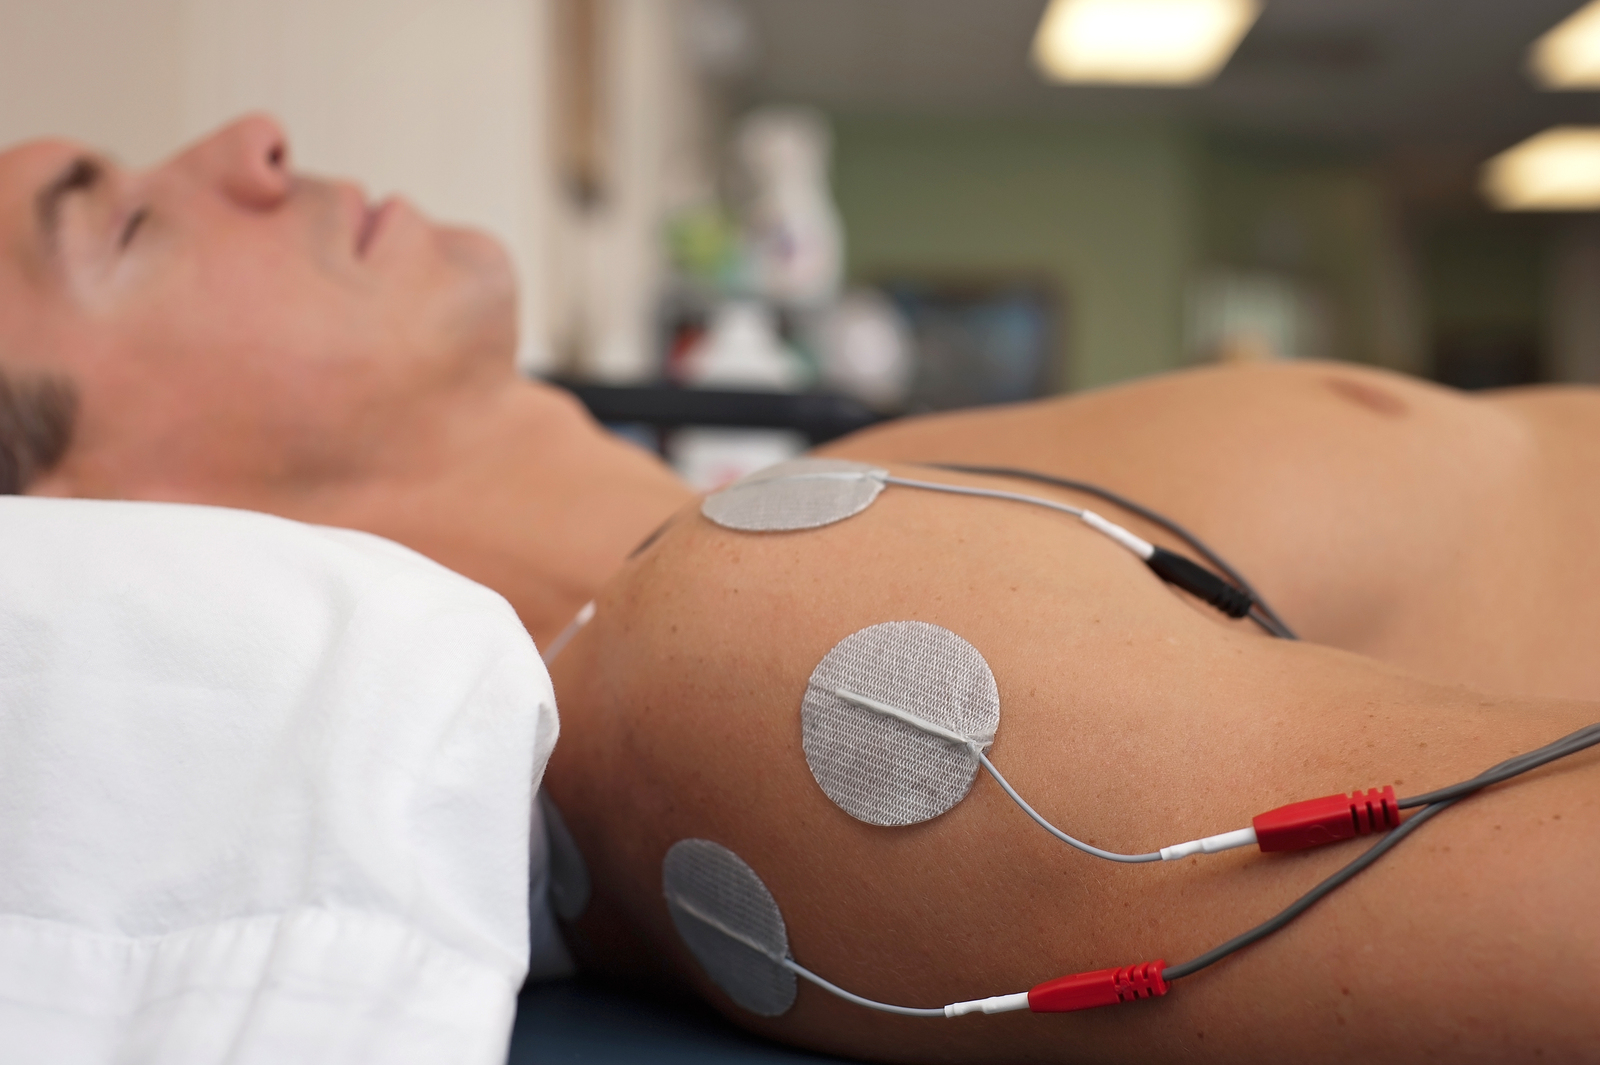 Medinza HealthCare - MUSCLE STIMULATOR IN DELHI. Electrical muscle  stimulation (EMS), also known as neuromuscular electrical stimulation  (NMES) or electromyostimulation, is the elicitation of muscle contraction  using electric impulses.  The impulses